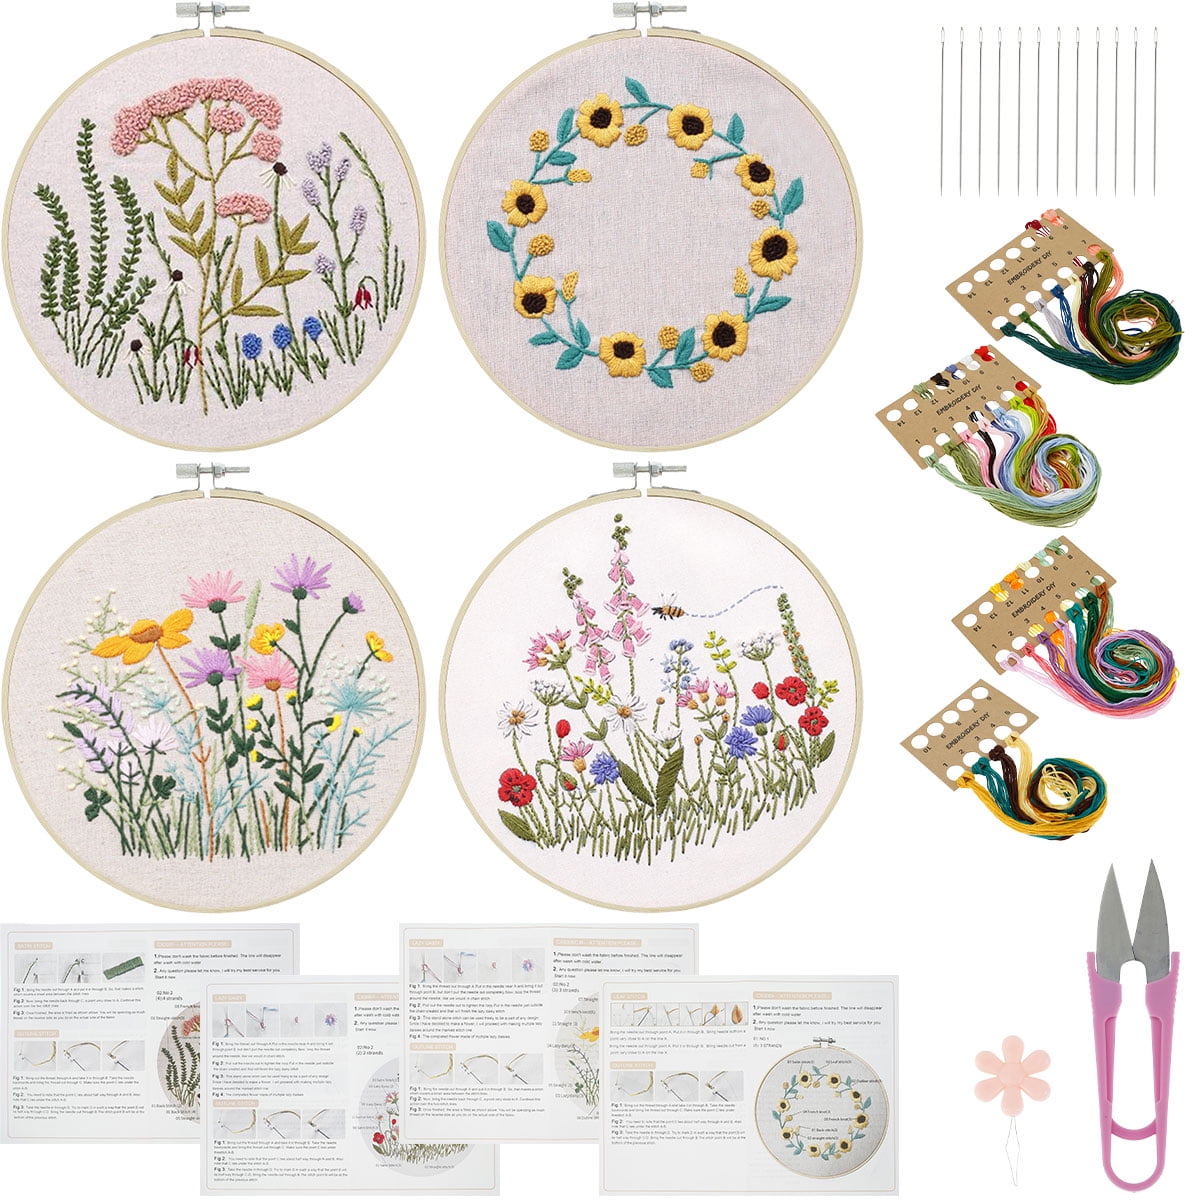 Embroidery Starter Kit With Pattern English Instructions,Full Range Cross  Stitch Kit For Beginners Embroidery Kits With Fabric Embroidery Hoop Floss